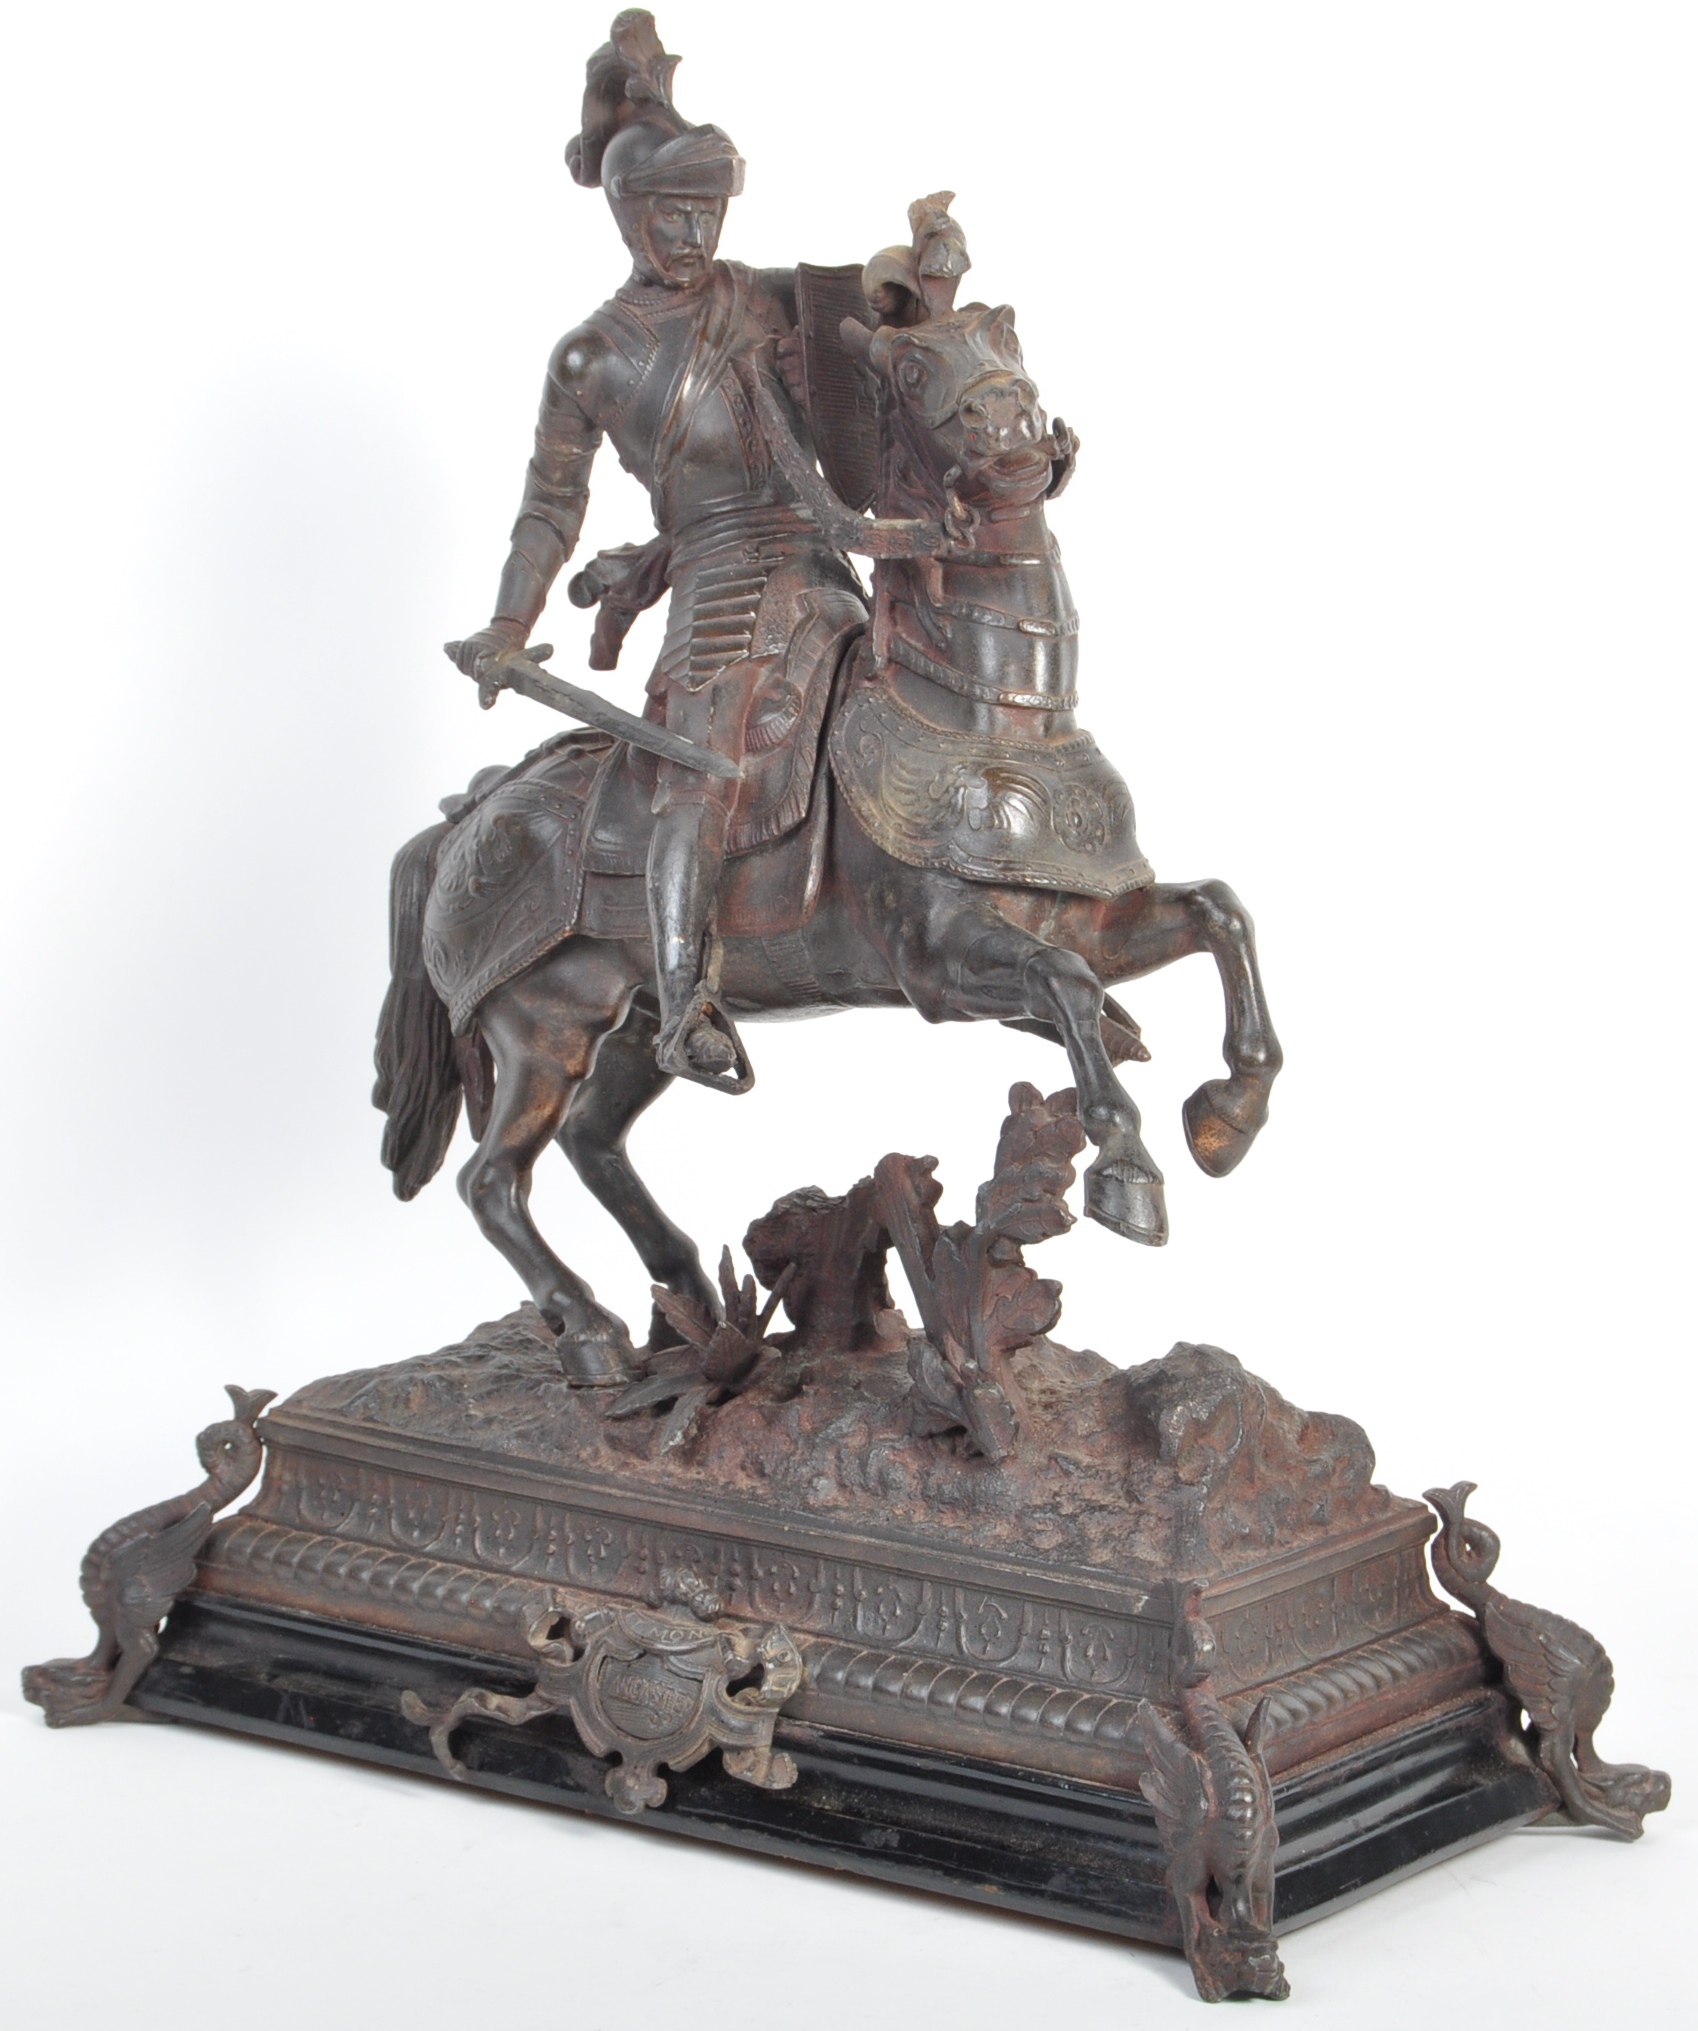 AN ANTIQUE 19TH CENTURY VICTORIAN SPELTER OF THE DUKE OF LANCASTER